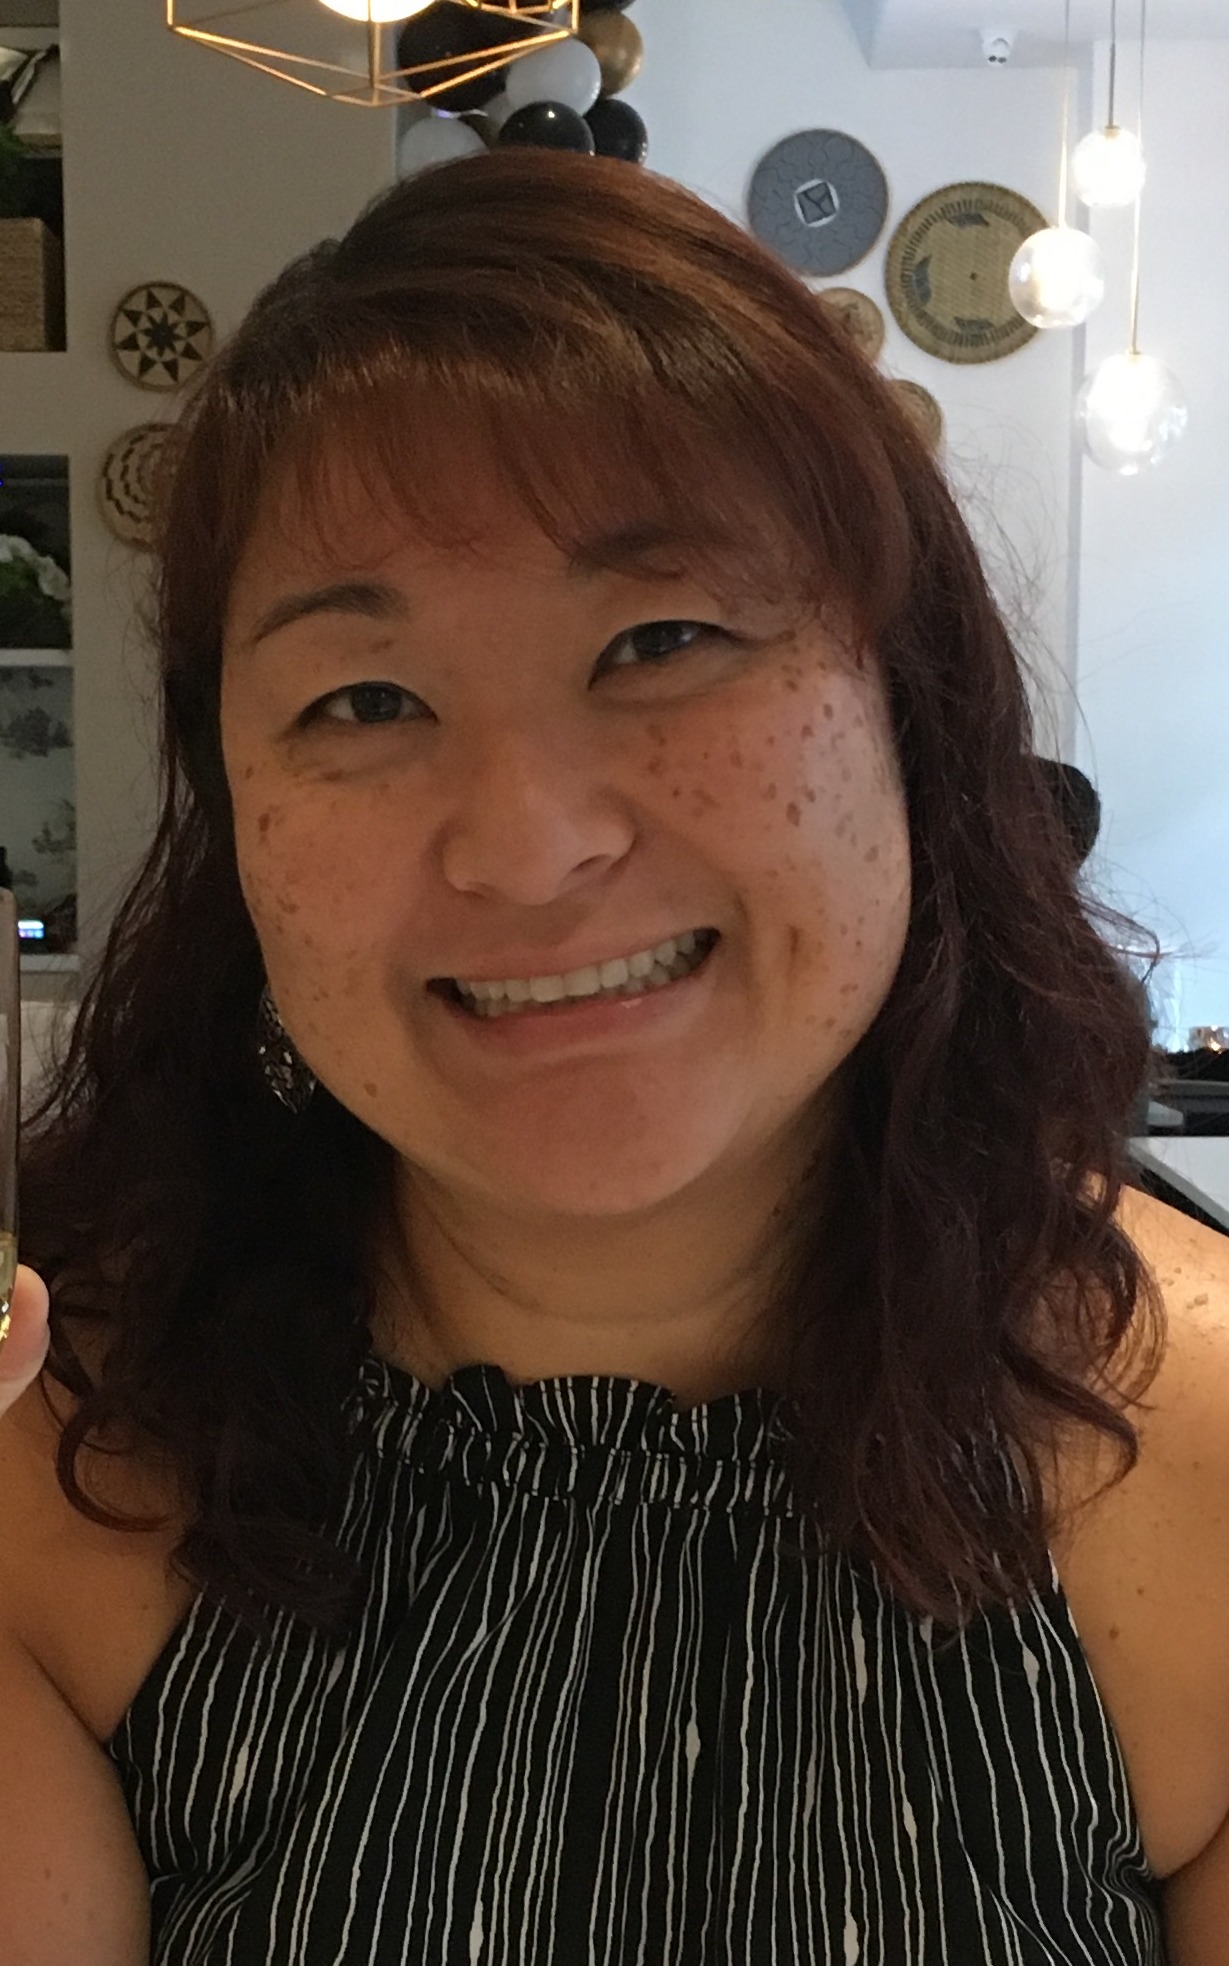 Eliza has been with Burnaby Tennis Club for the last 3.5 years.  She has considerable experience in sports club management and all it entails.  She was the former General Manager of Cliff Avenue United FC soccer club in North Burnaby for over 7 years.  Please introduce yourself to her in the office.